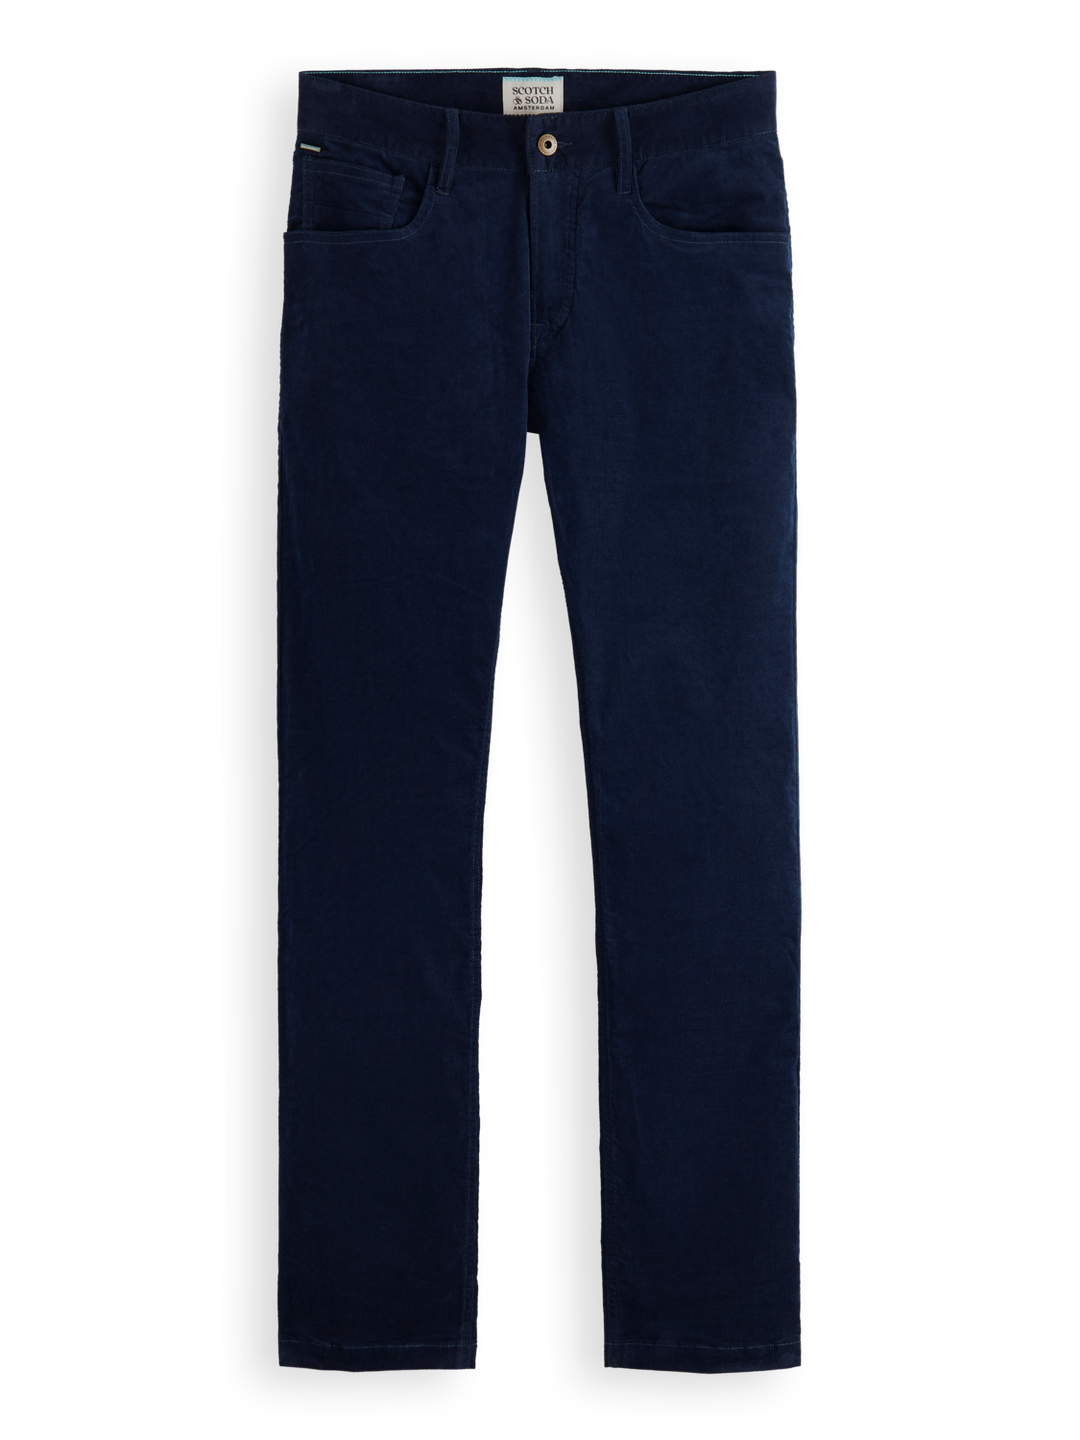 Ralston 5 Pocket Fine Corduroy Pant in Steel | Buster McGee